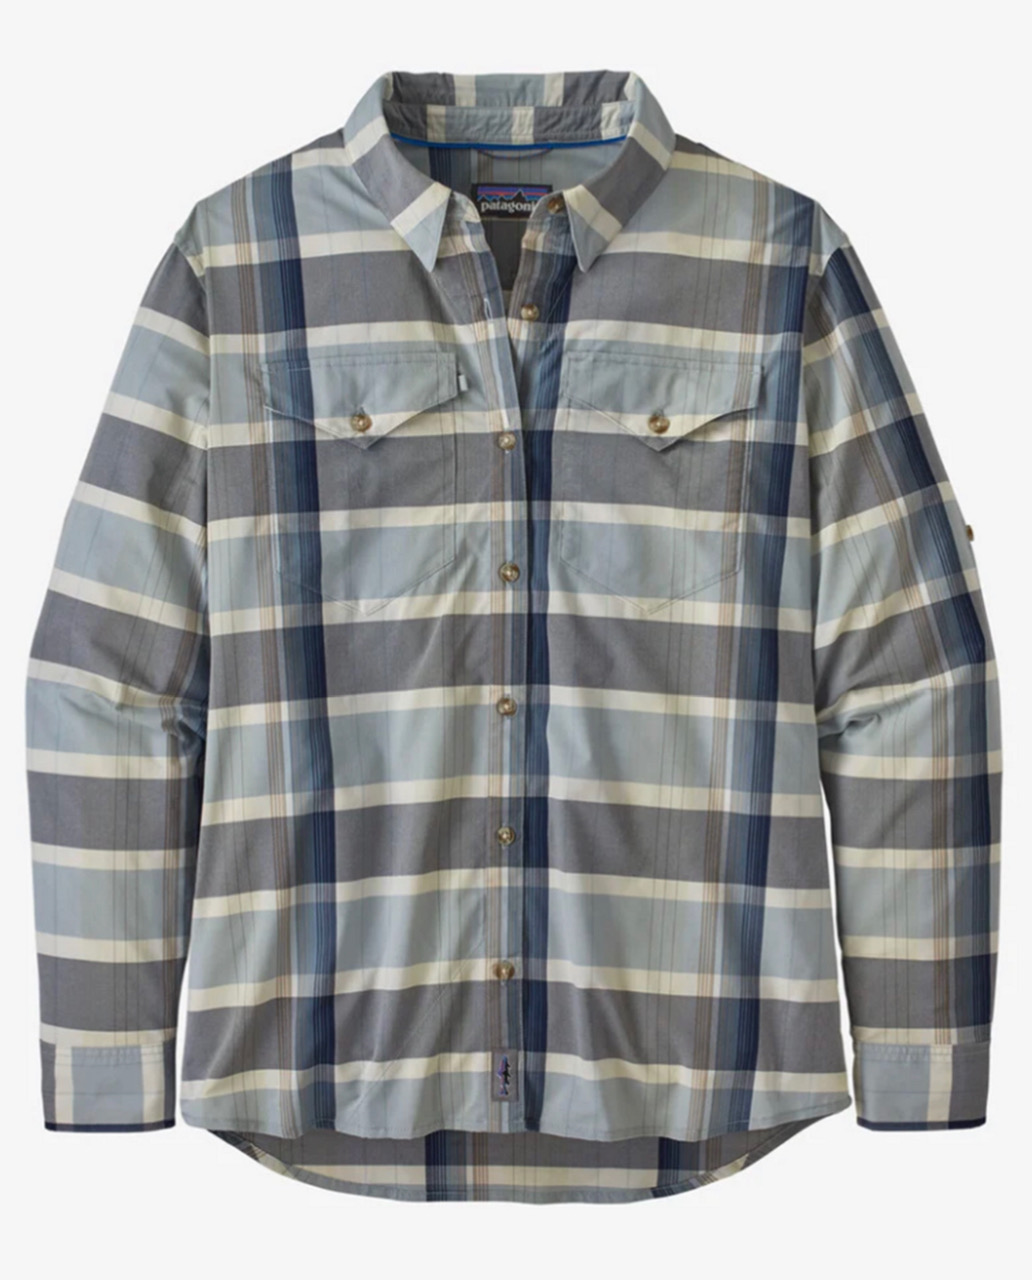 Patagonia W's L/S Sun Stretch Shirt - Cotton Seed: Berlin Blue - Small